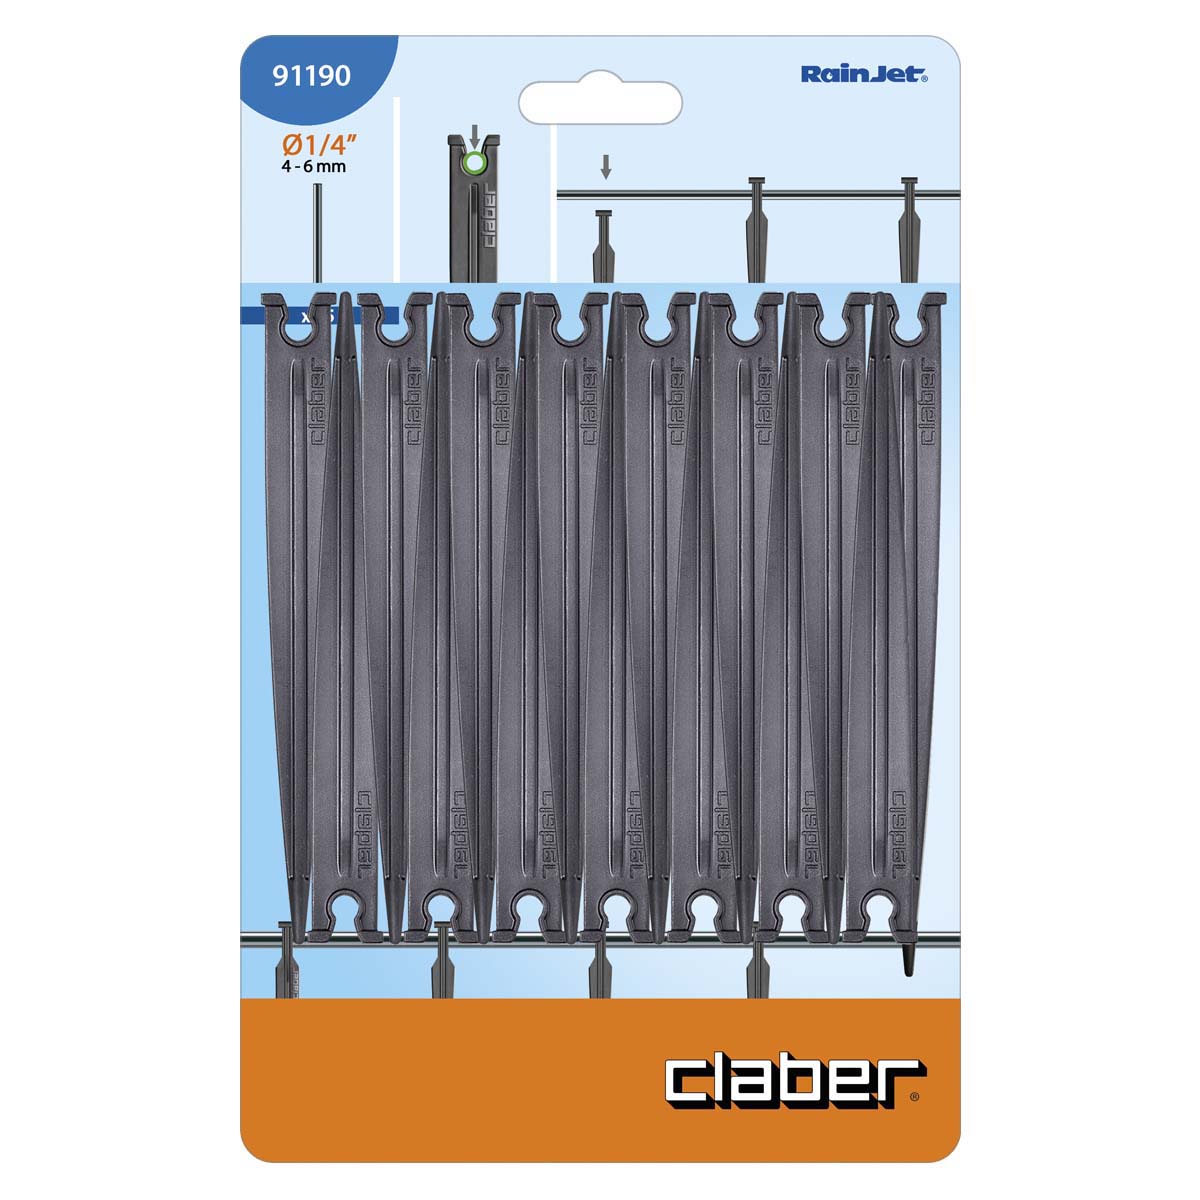 Claber 1/2" Tube Support Stake multipack savings available! 